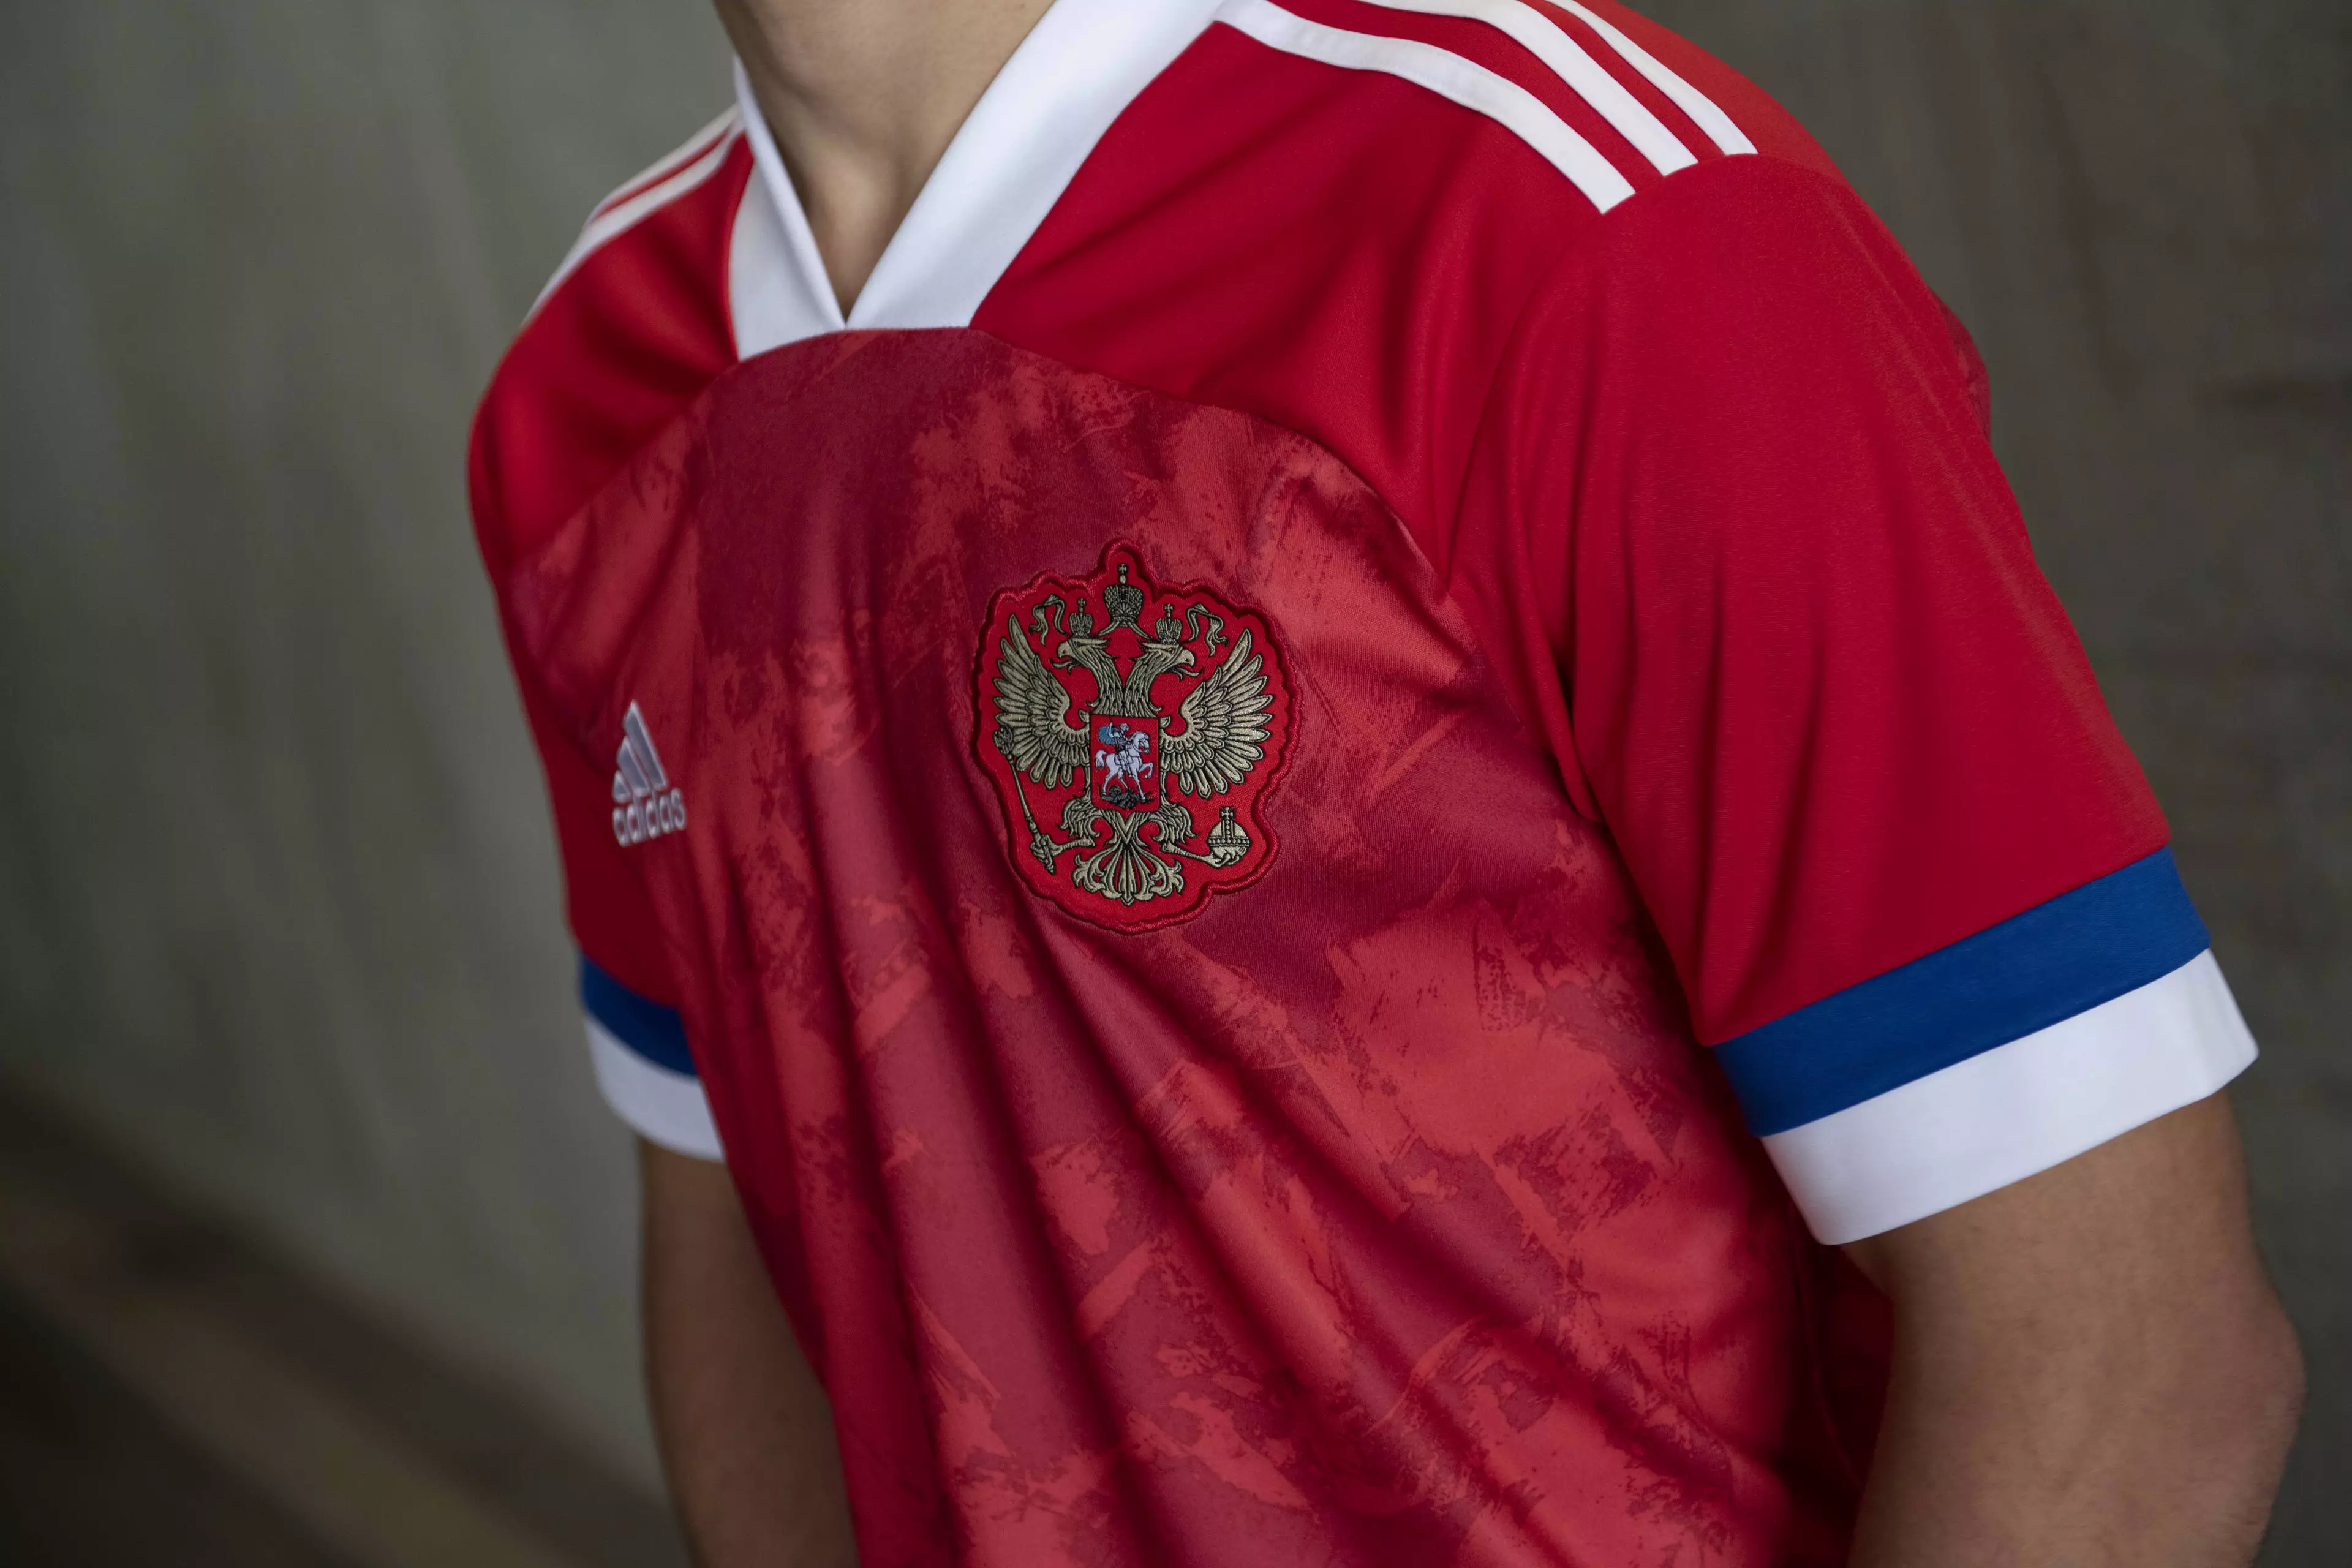 Russia have also qualified. Image: Adidas